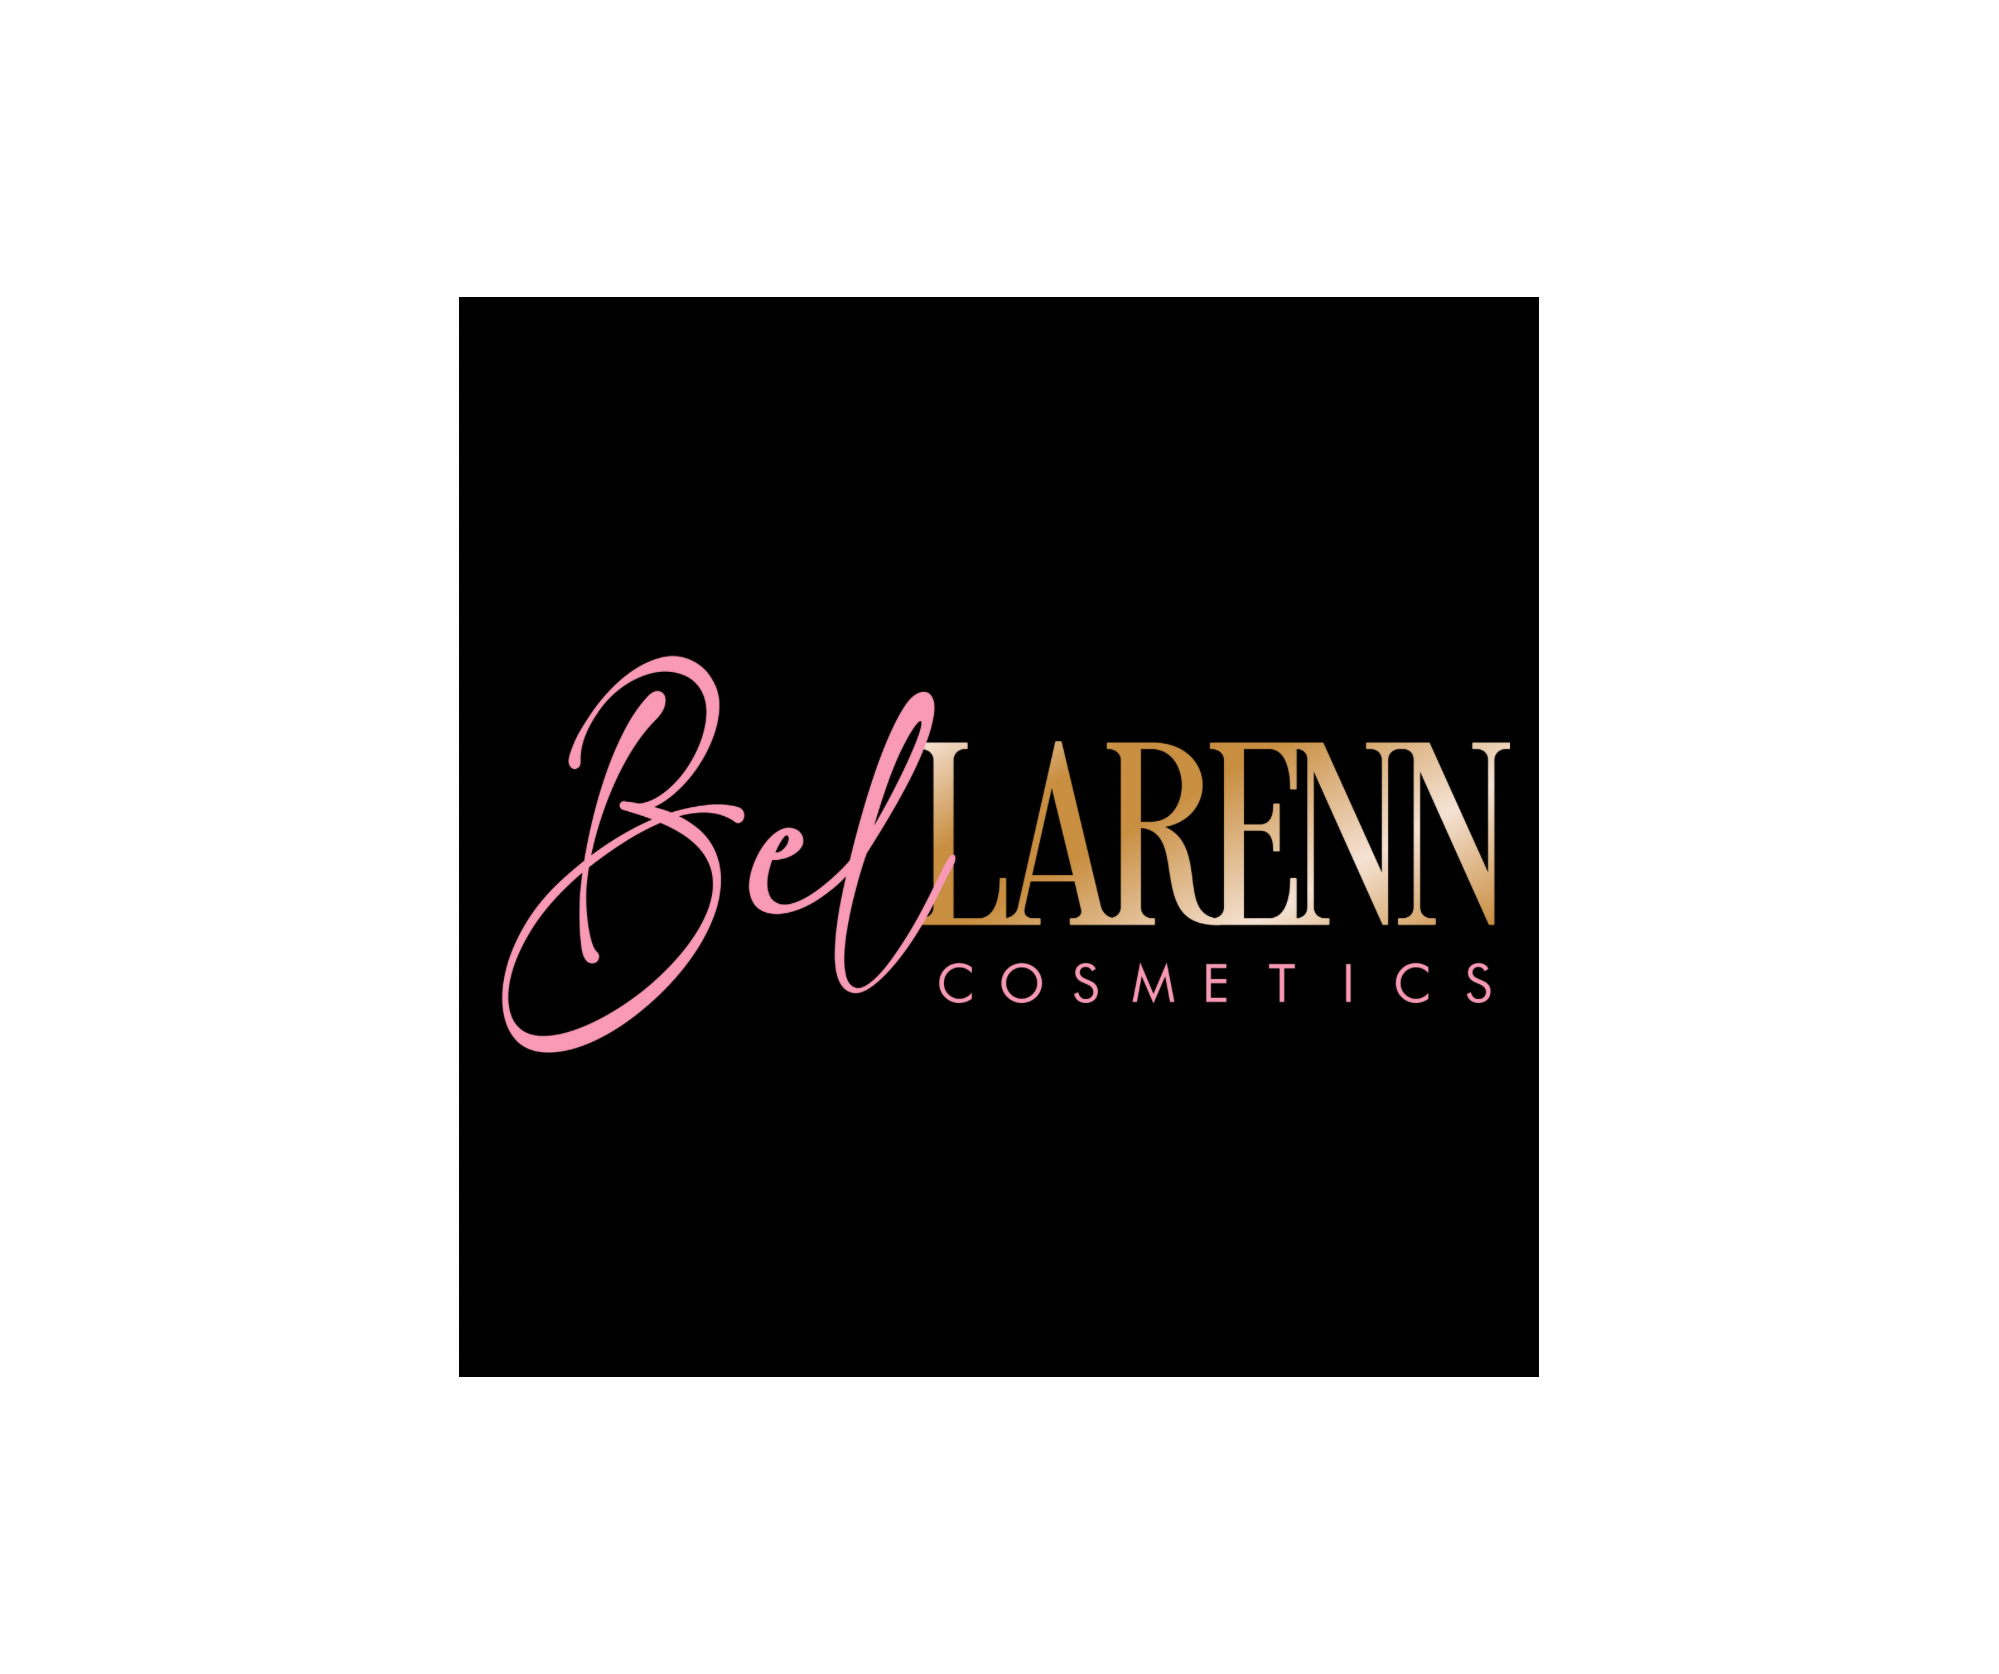 Taking Beauty to Another Level - Bel Larenn Cosmetics